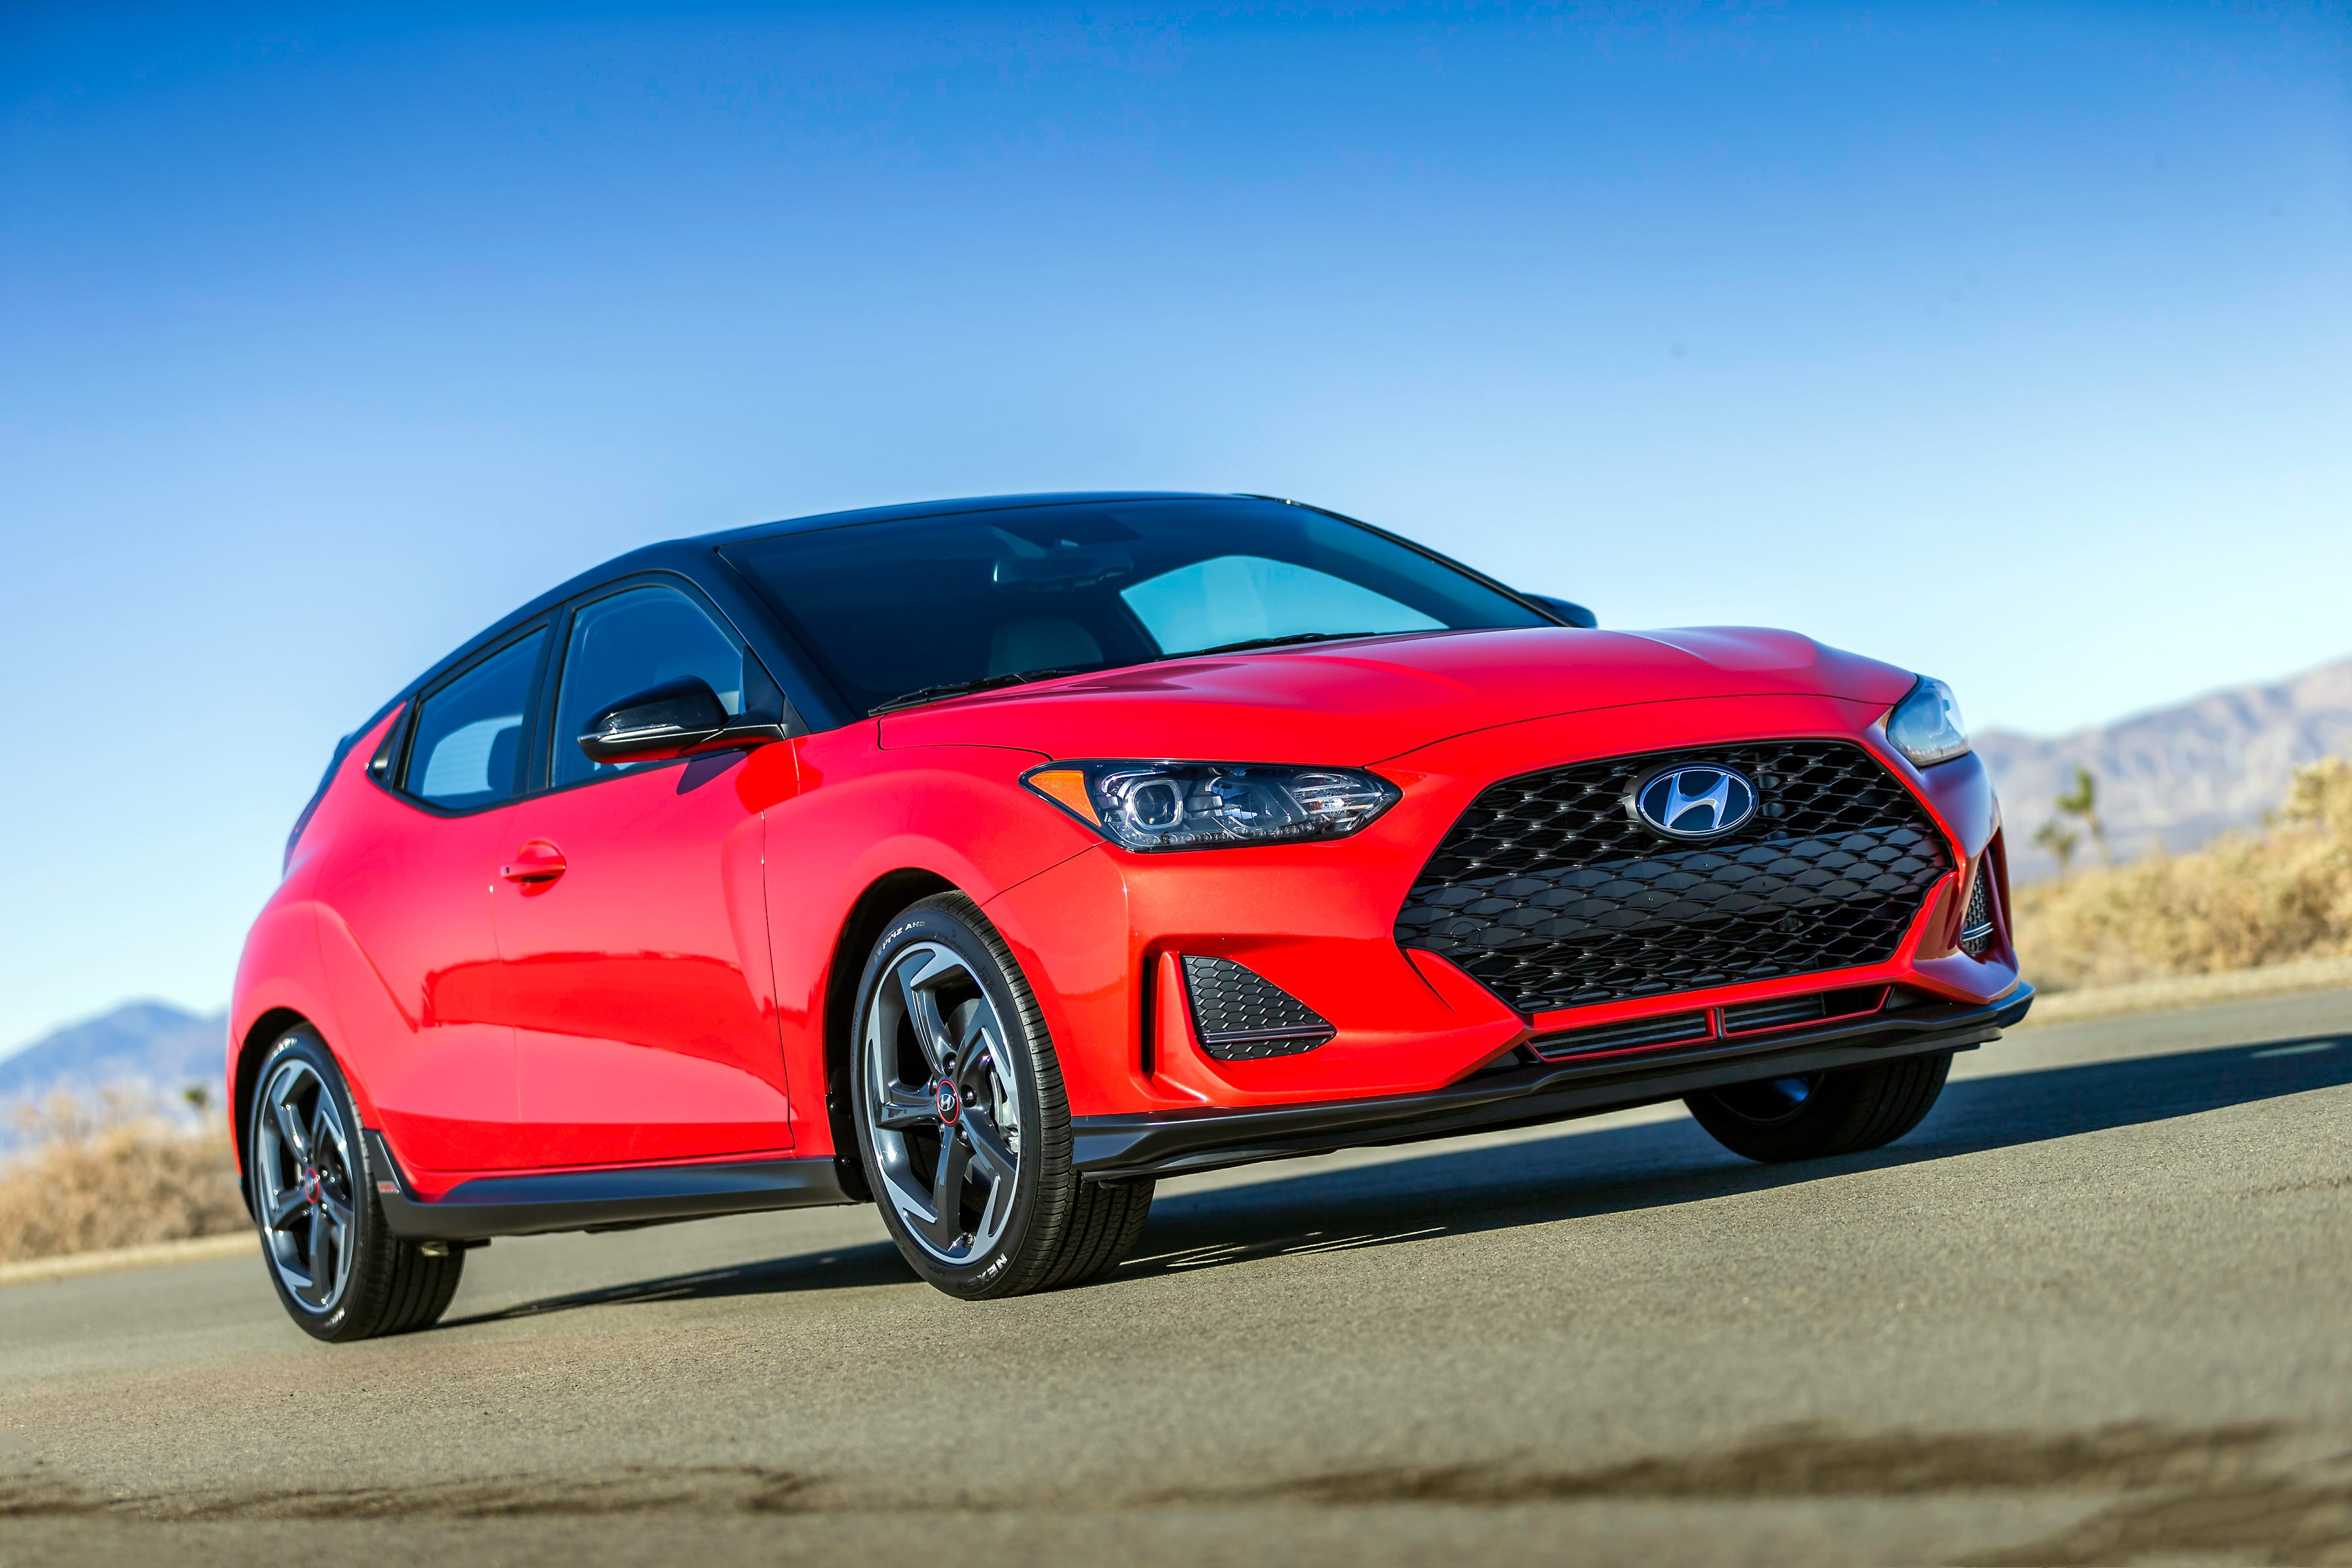 Is 2019 Hyundai Veloster the last of the sporty compacts?